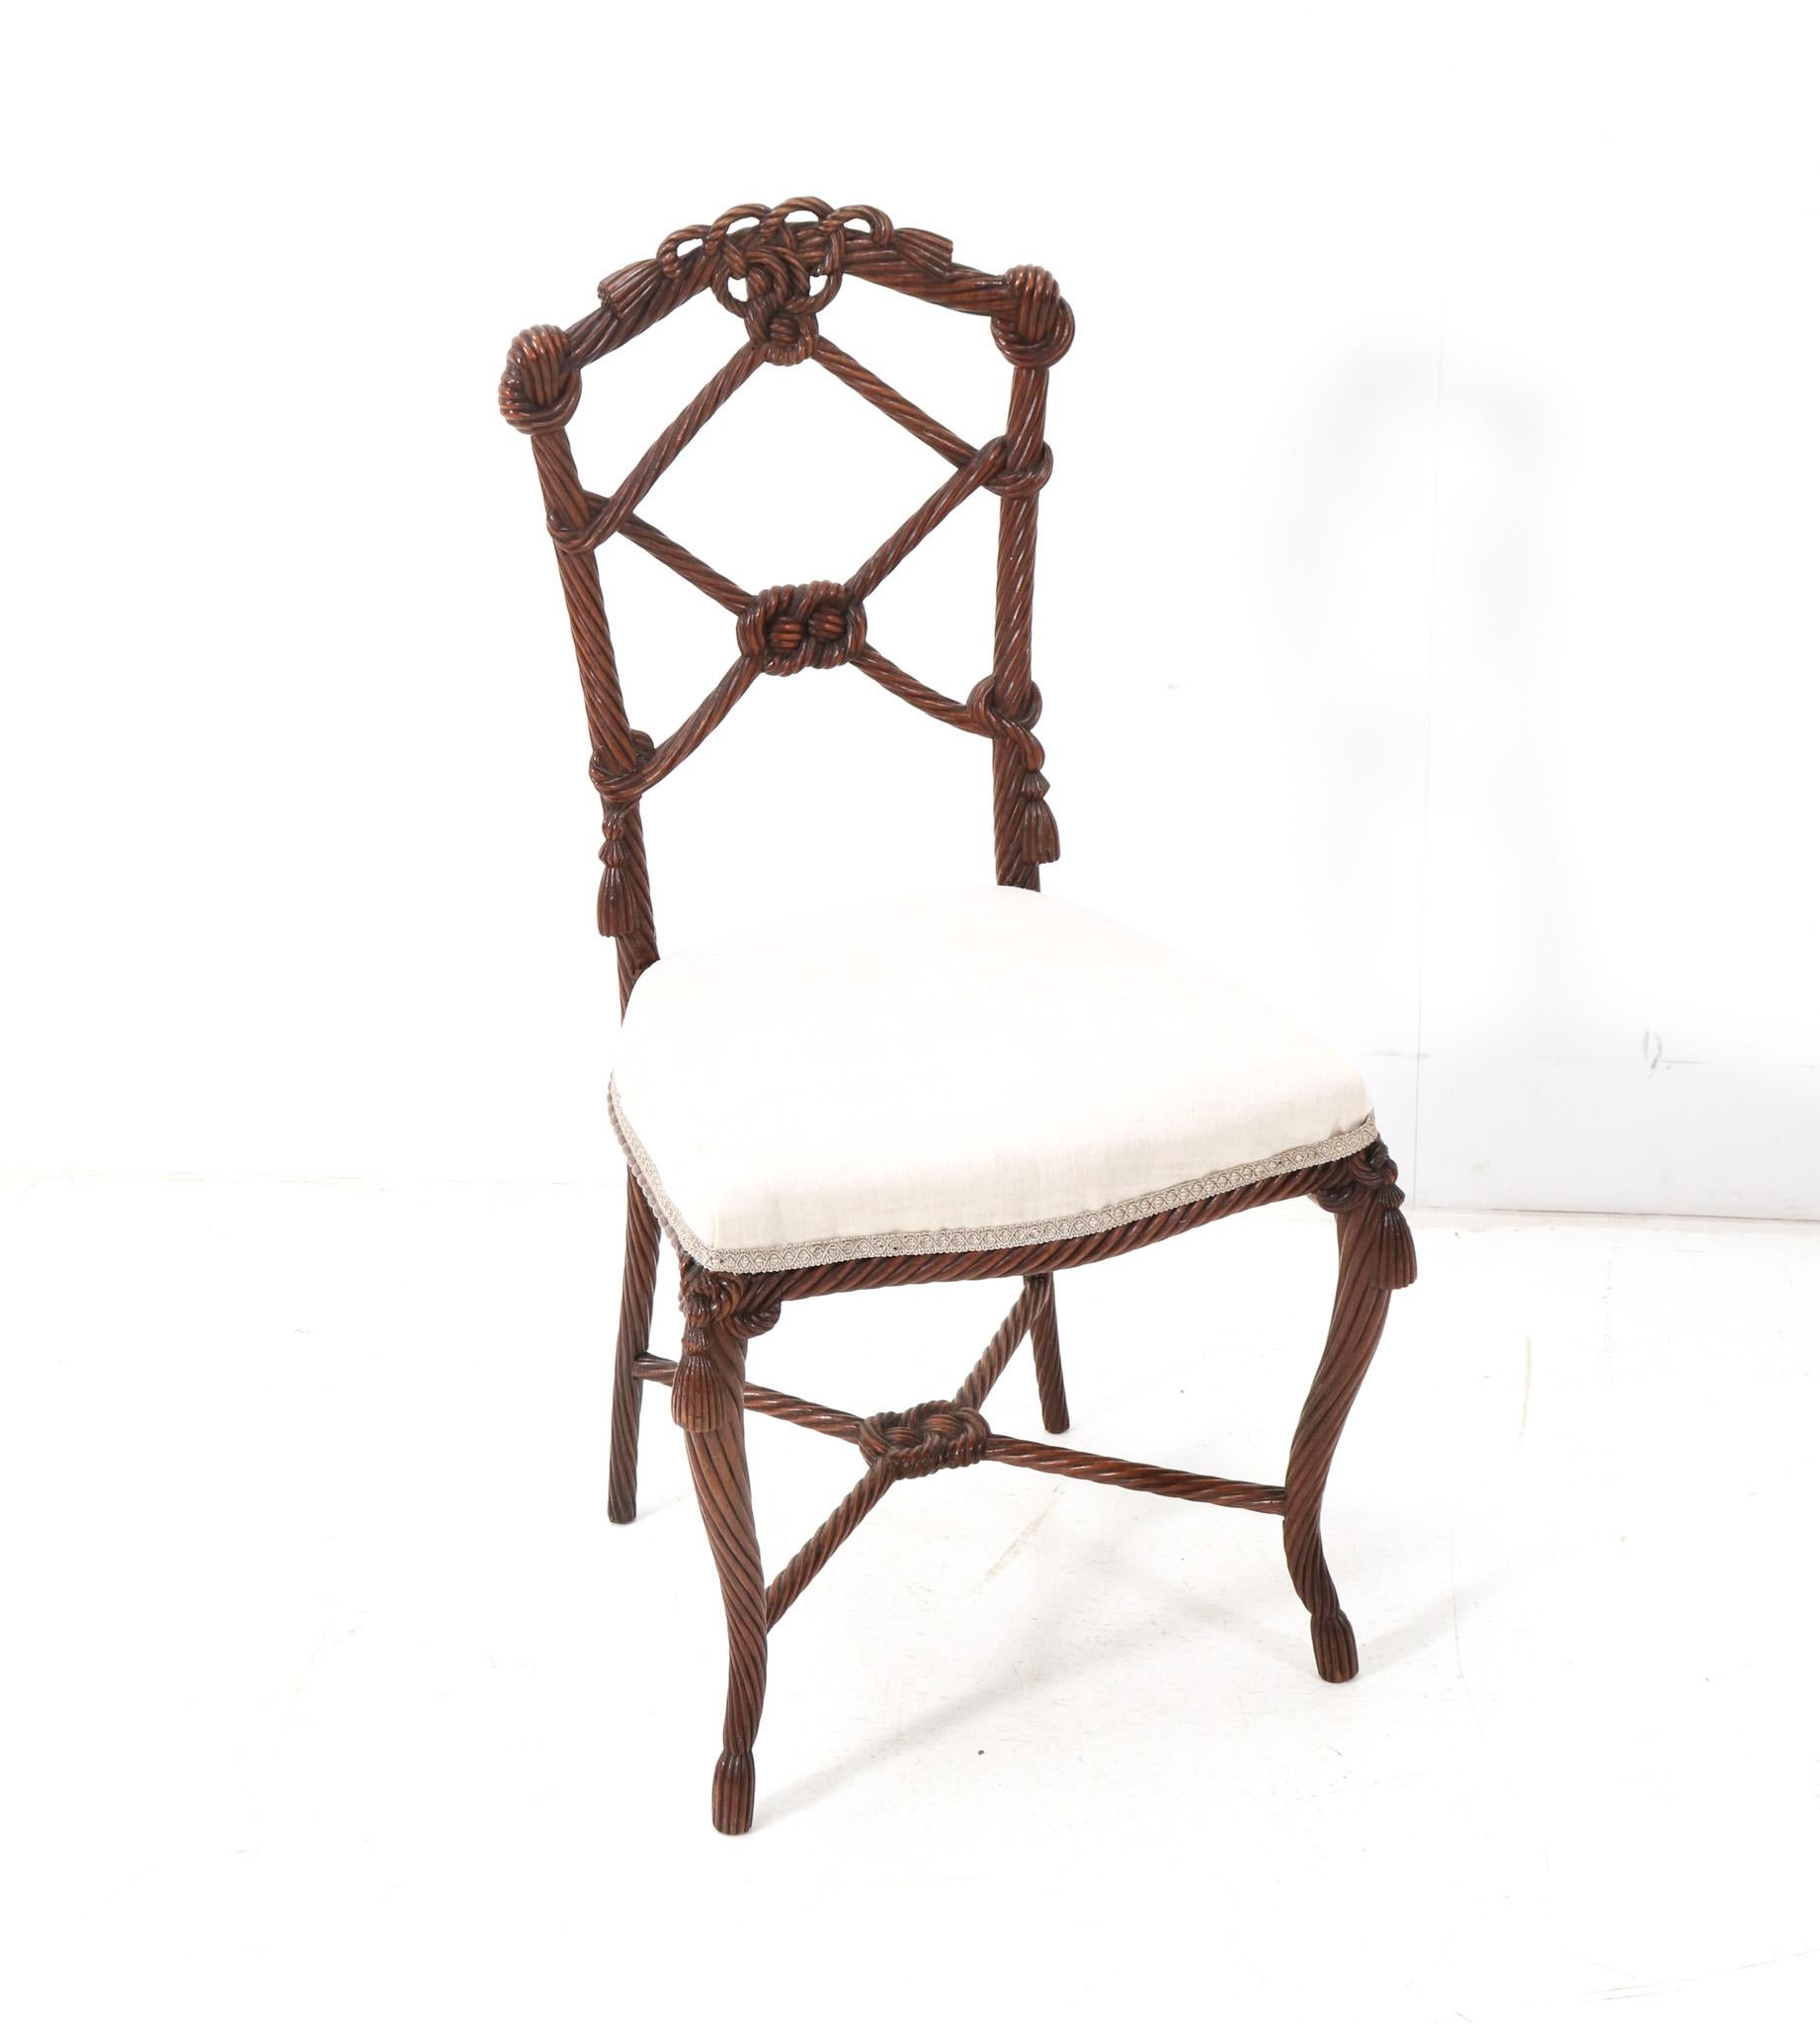 Magnificent and ultra rare Victorian side chair.
Striking French design from the 1890s.
Original hand-carved walnut frame and re-upholstered with a quality fabric.
This wonderful Victorian side chair is in very good original condition with minor